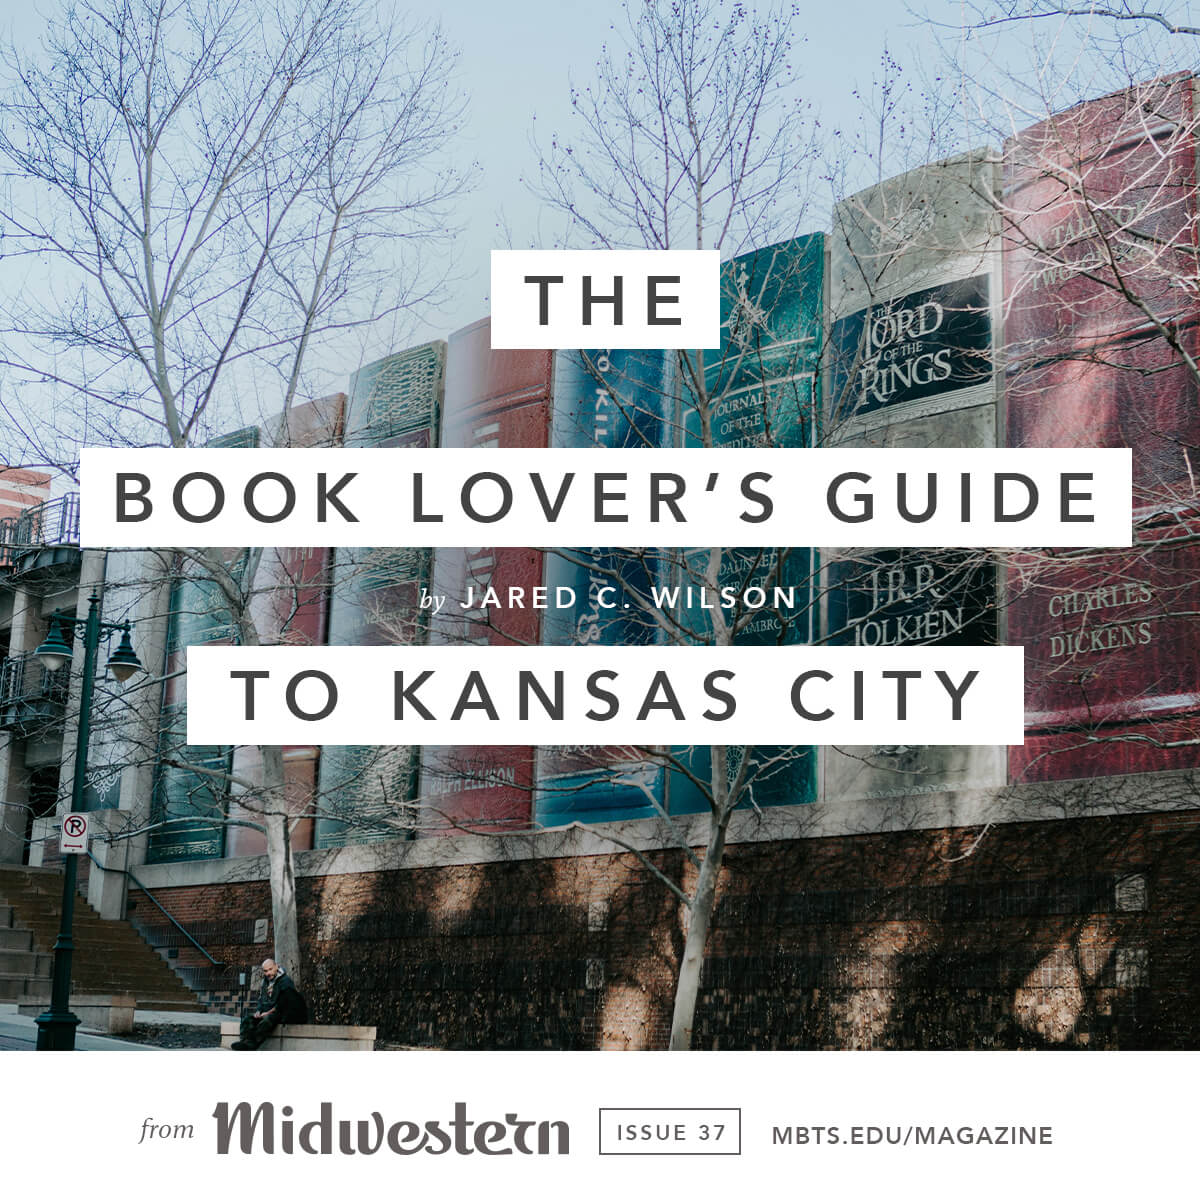 The Book Lover's Guide to Kansas City